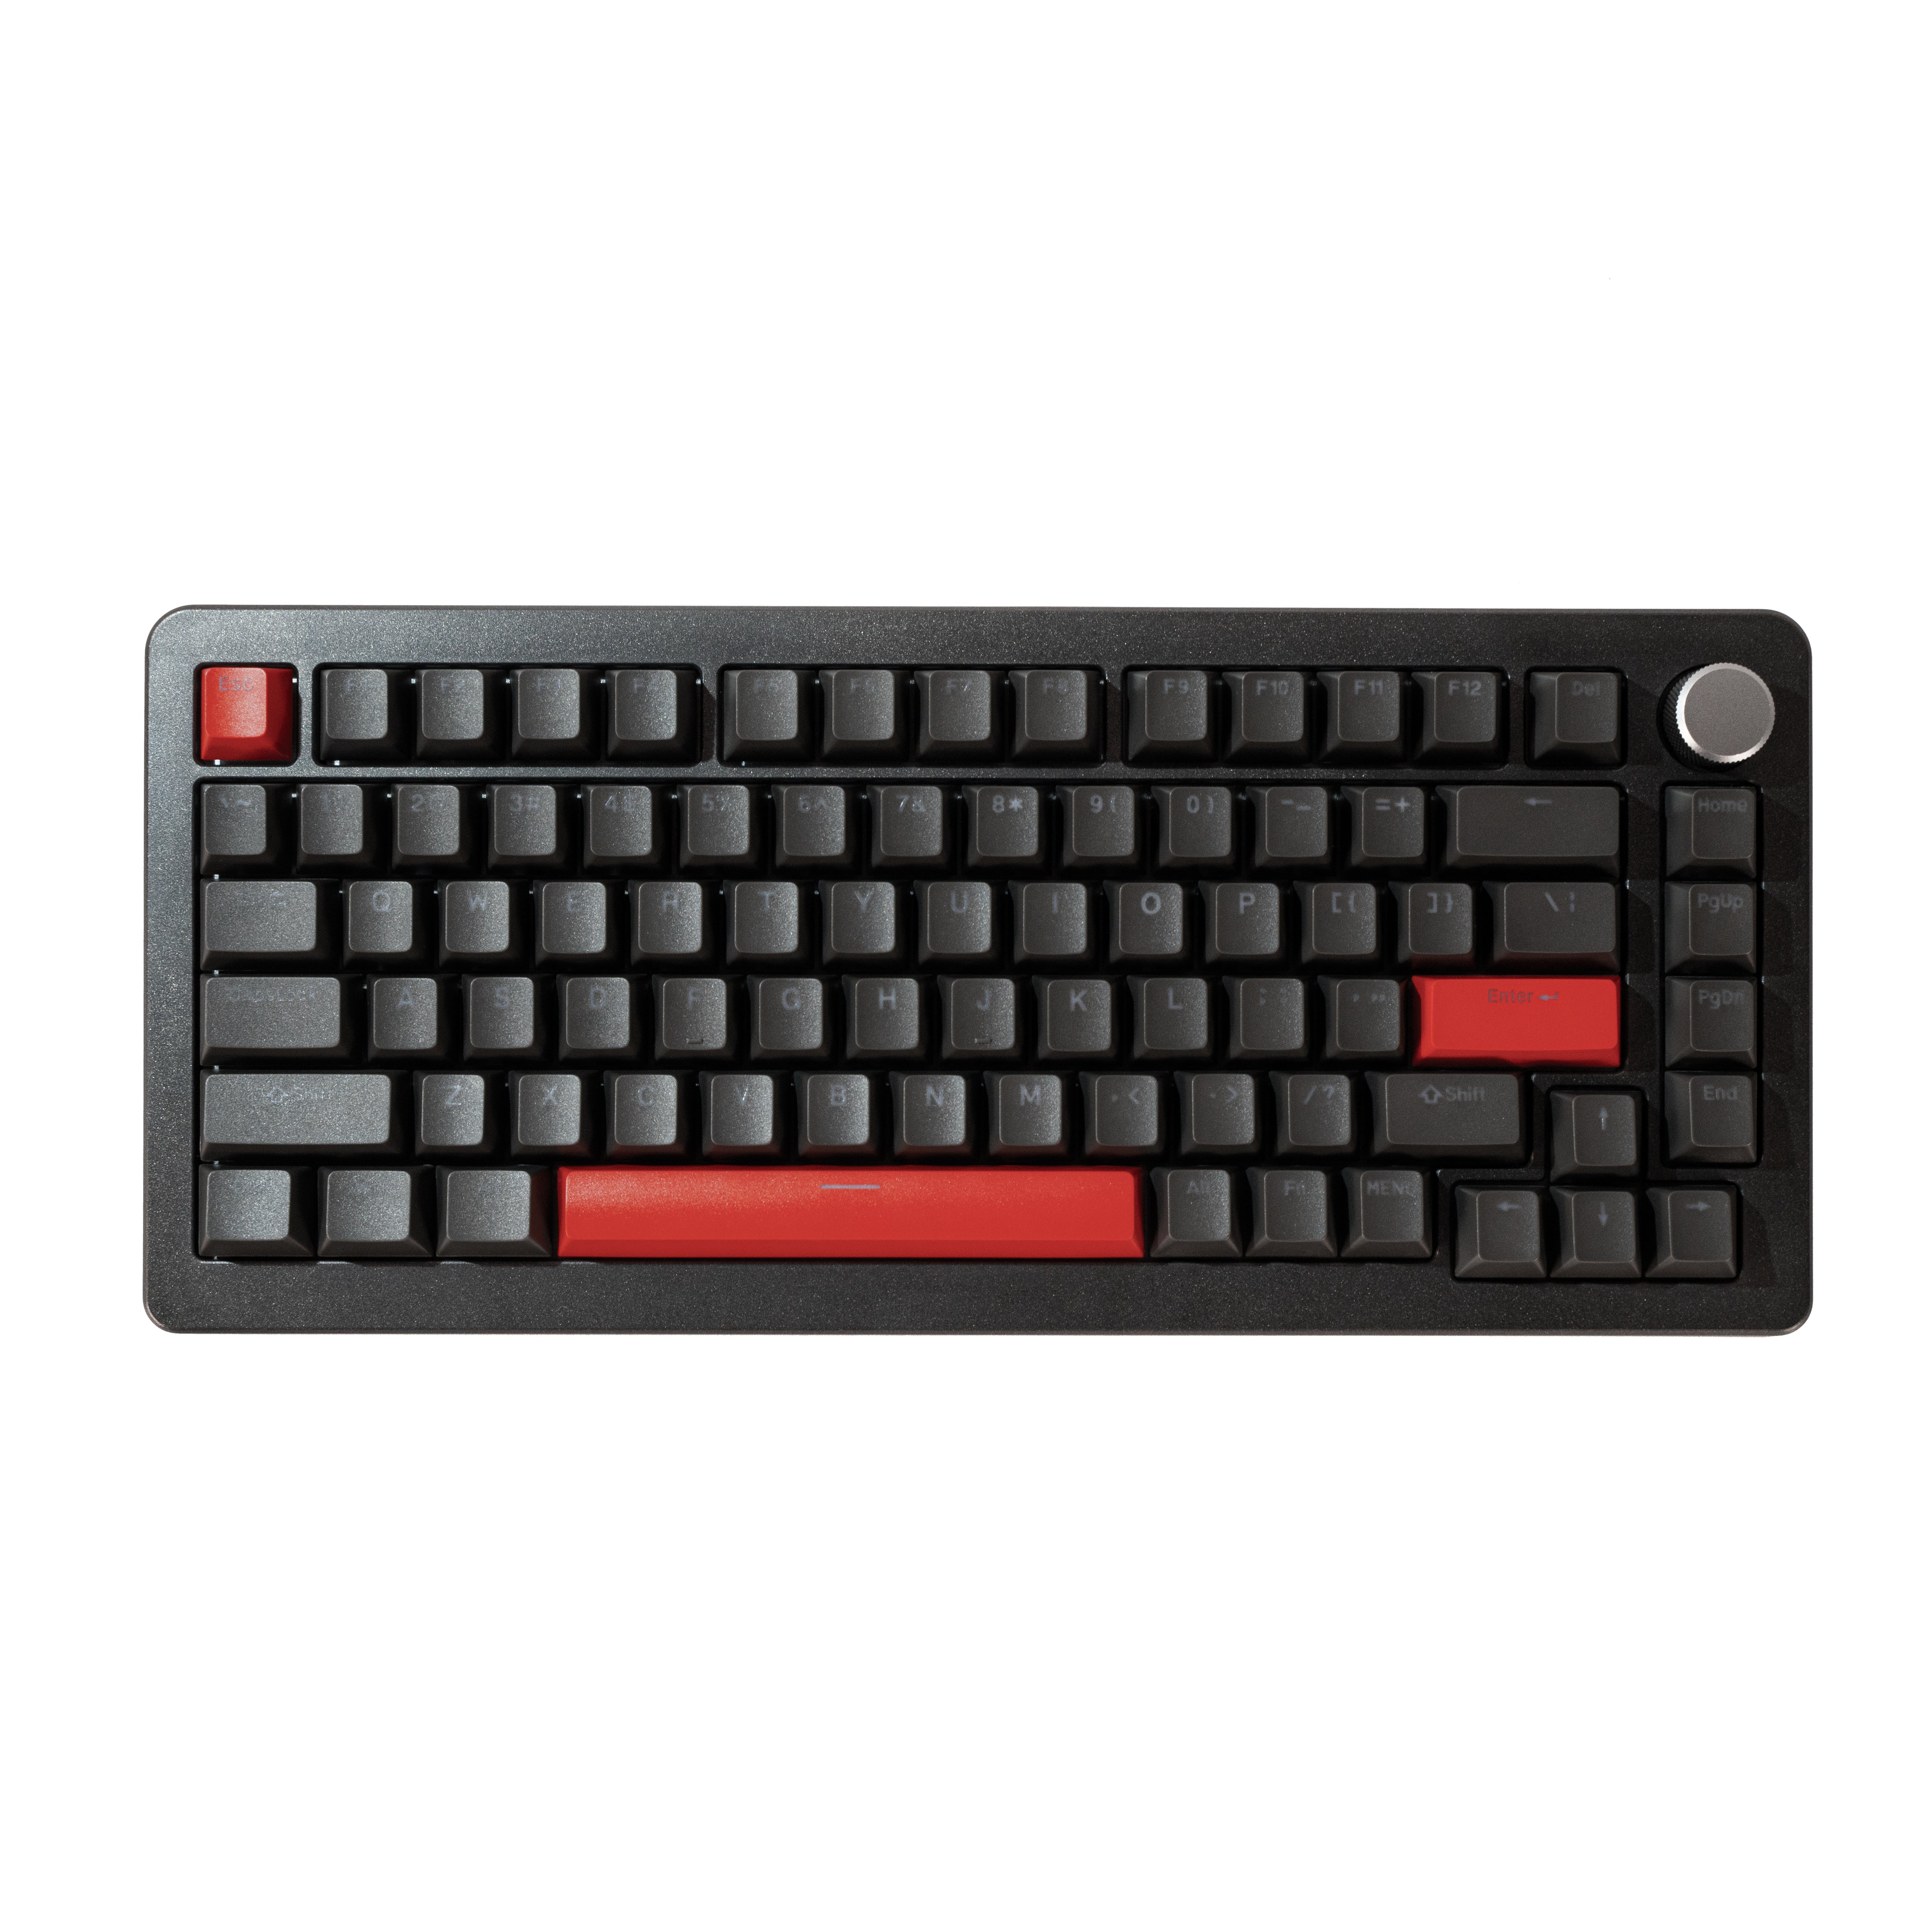 DrunkDeer A75 Pro - Rapid Trigger Keyboard Magnetic Switch 